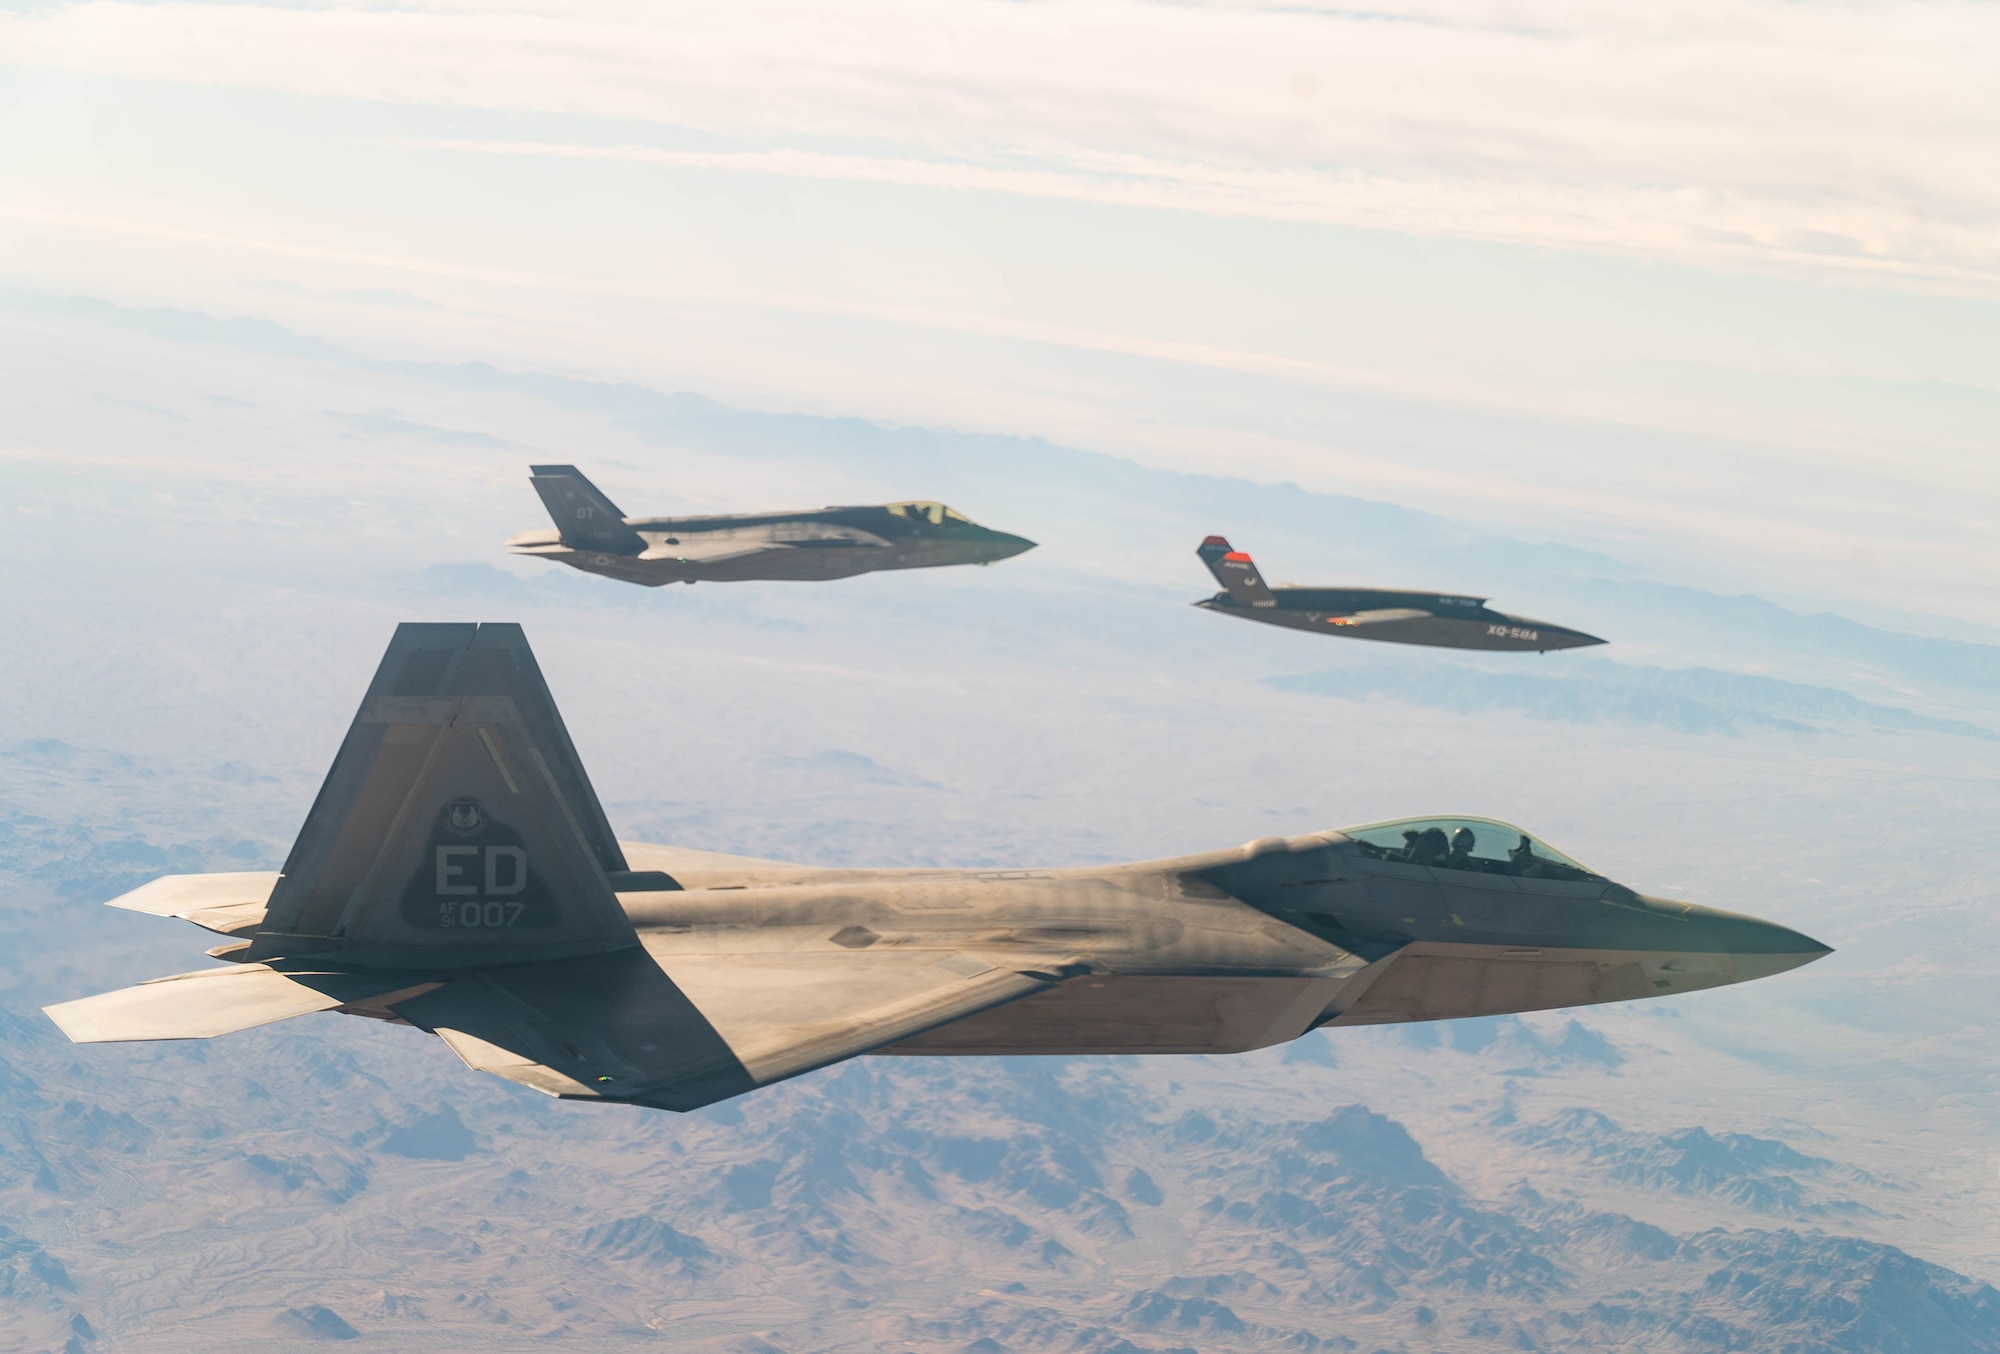 A U.S. Air Force F-22 Raptor and F-35A Lightning II fly in formation with the XQ-58A Valkyrie low-cost unmanned aerial vehicle over the U.S. Army Yuma Proving Ground testing range, Ariz., during a series of tests Dec. 9, 2020. This integrated test follows a series of gatewayONE ground tests that began during the inaugural Department of the Air Force on-ramp last year in December.